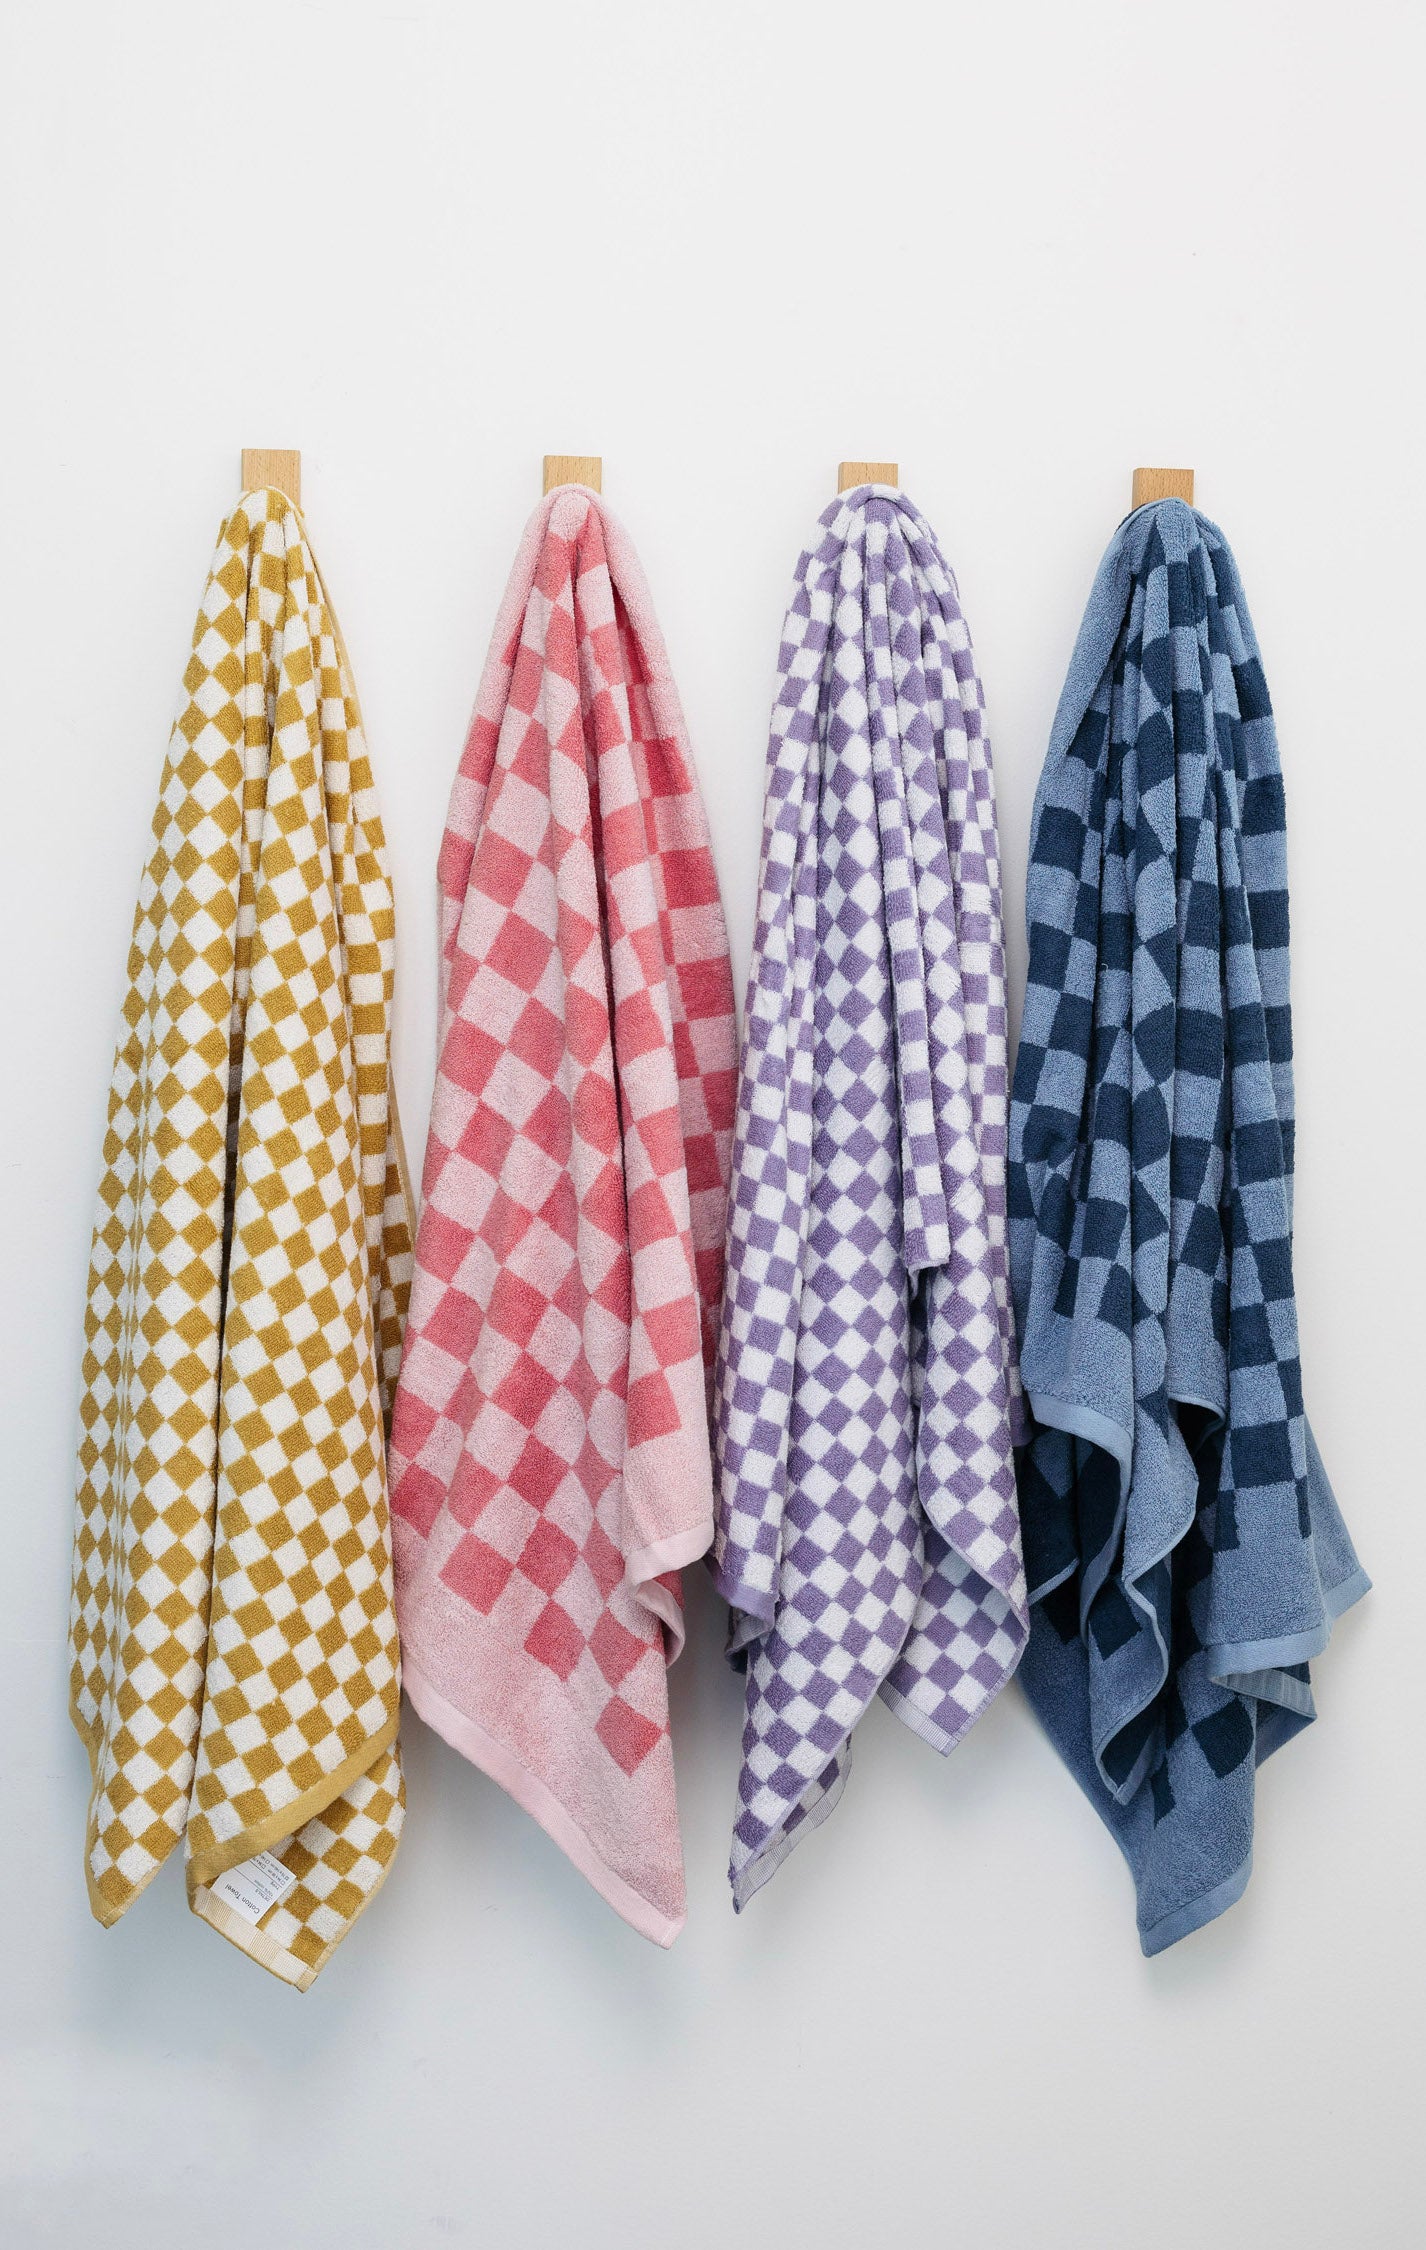 Mixed Up Bath Towel - Sunkissed